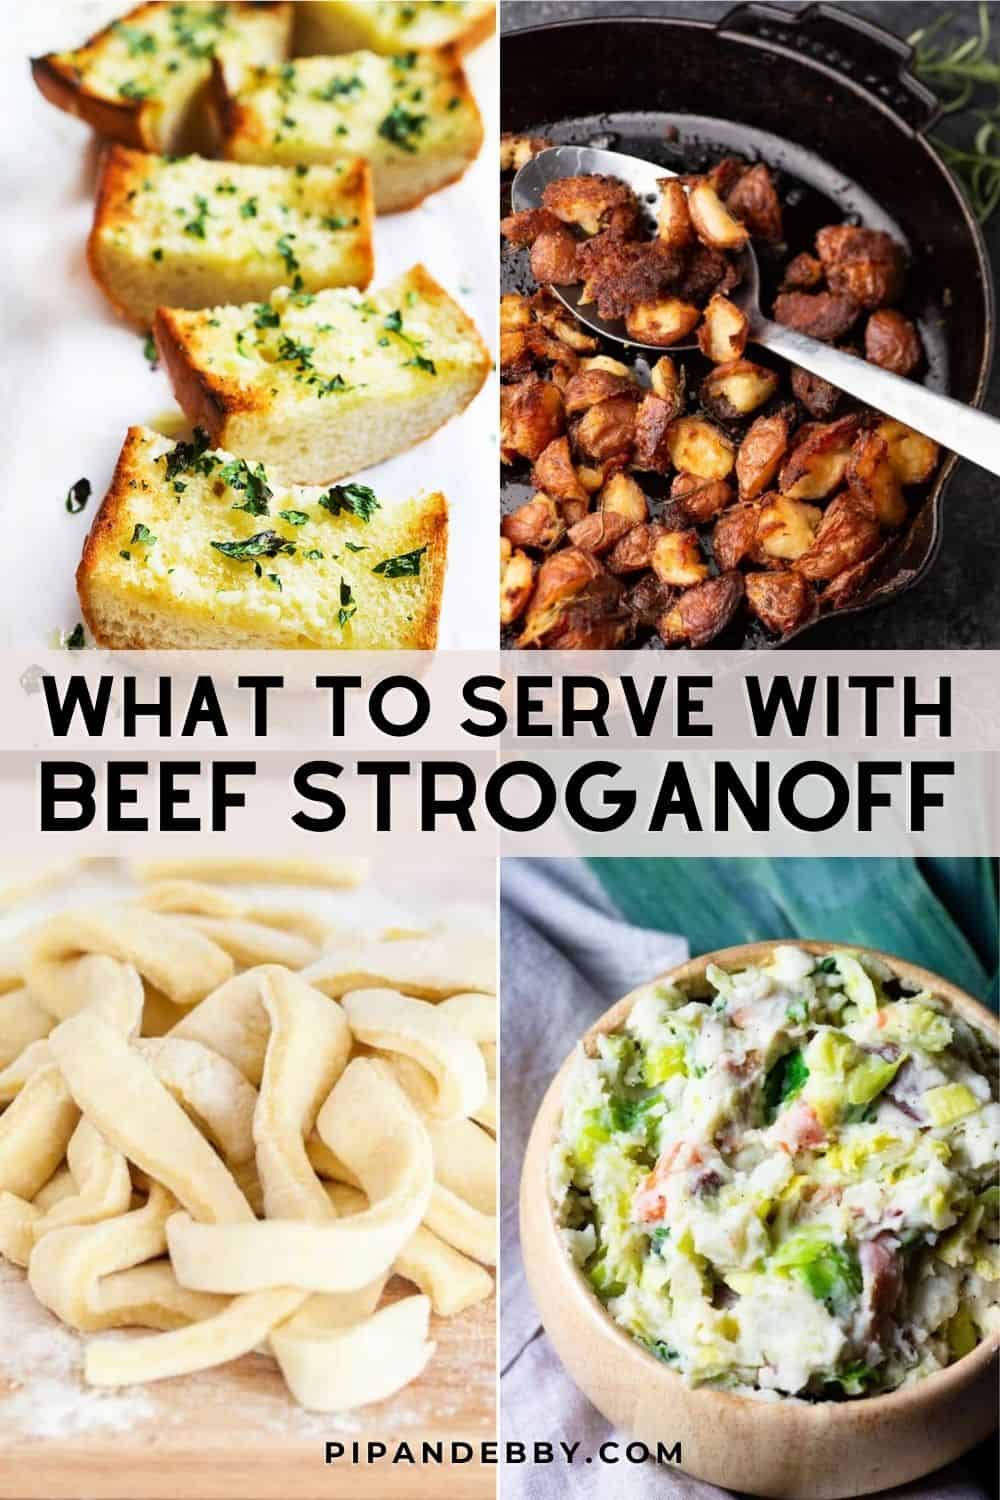 Four recipes photos with text overlay reading, "What to serve with beef stroganoff."